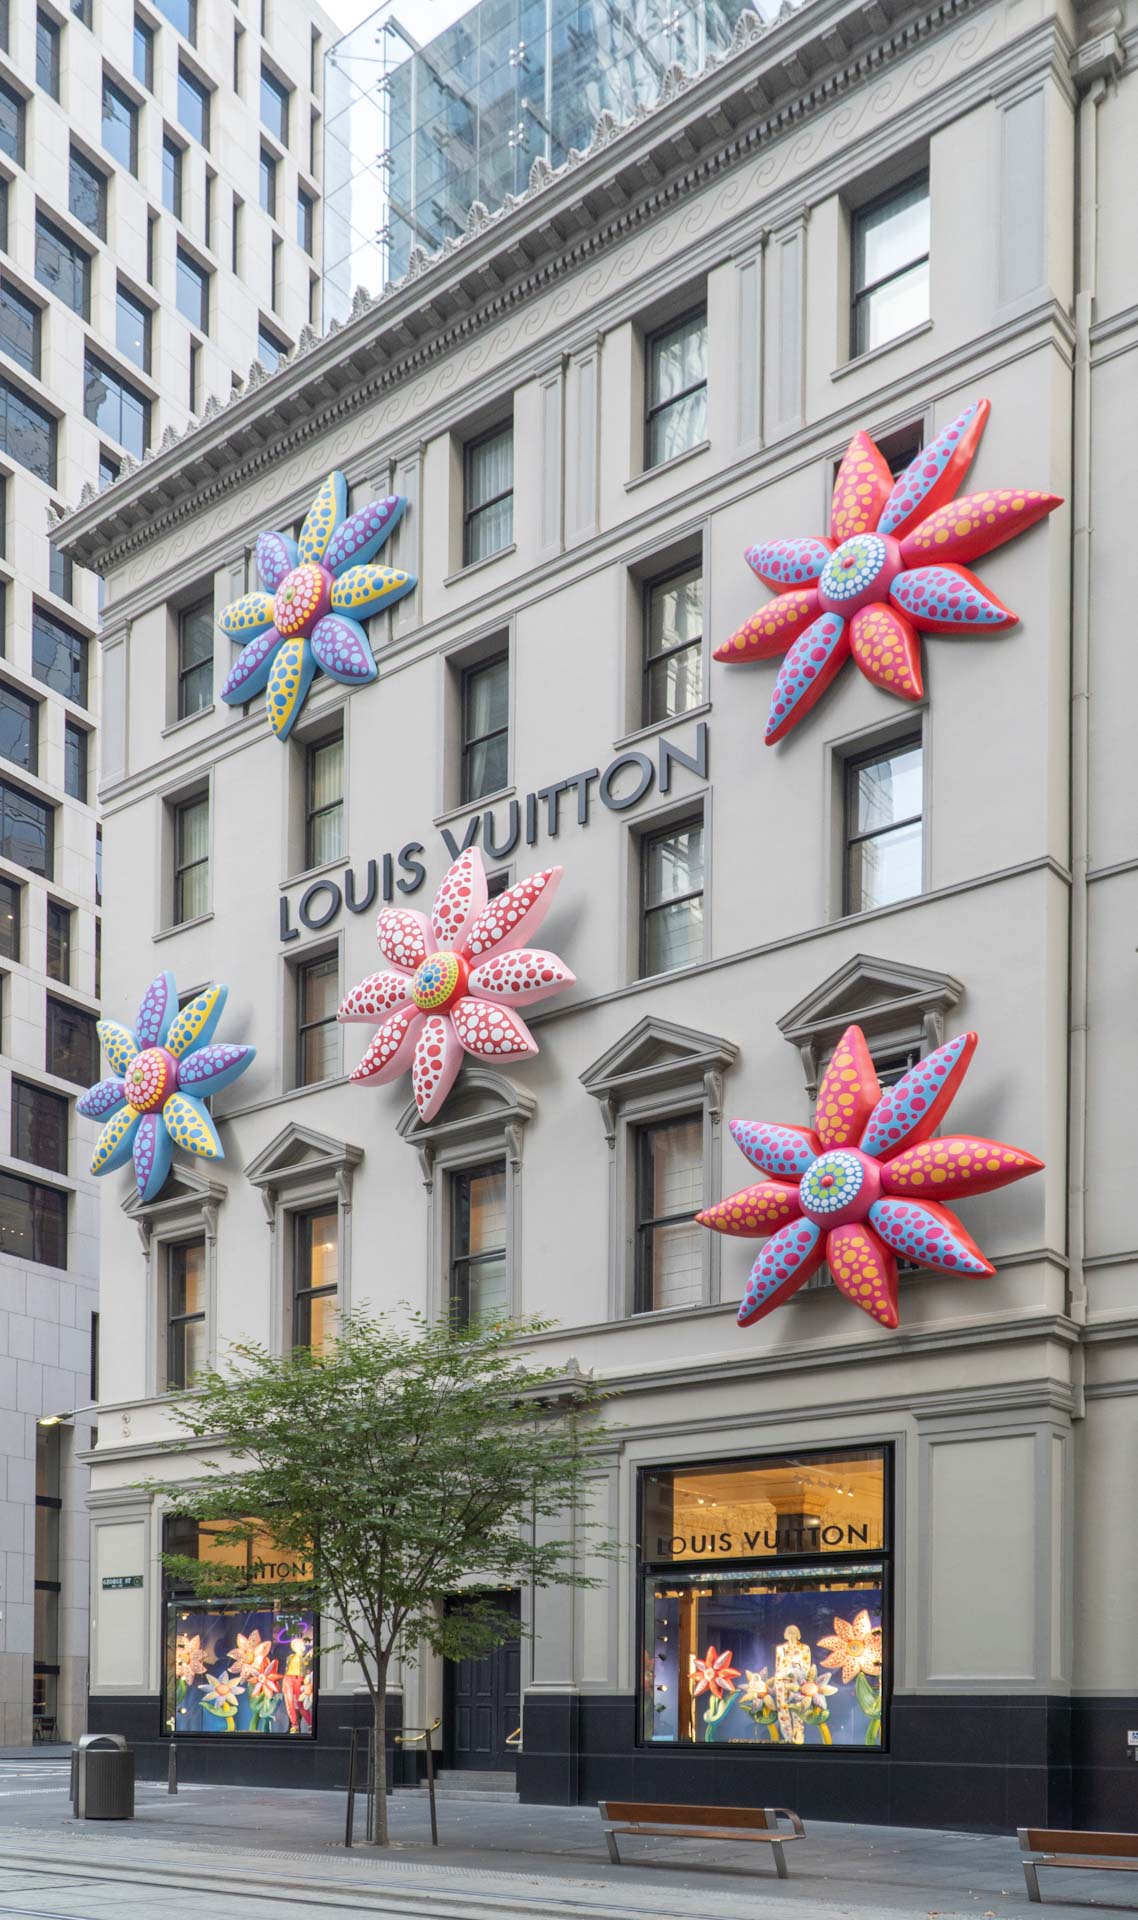 Louis Vuitton is popping up in Sydney and Melbourne with an